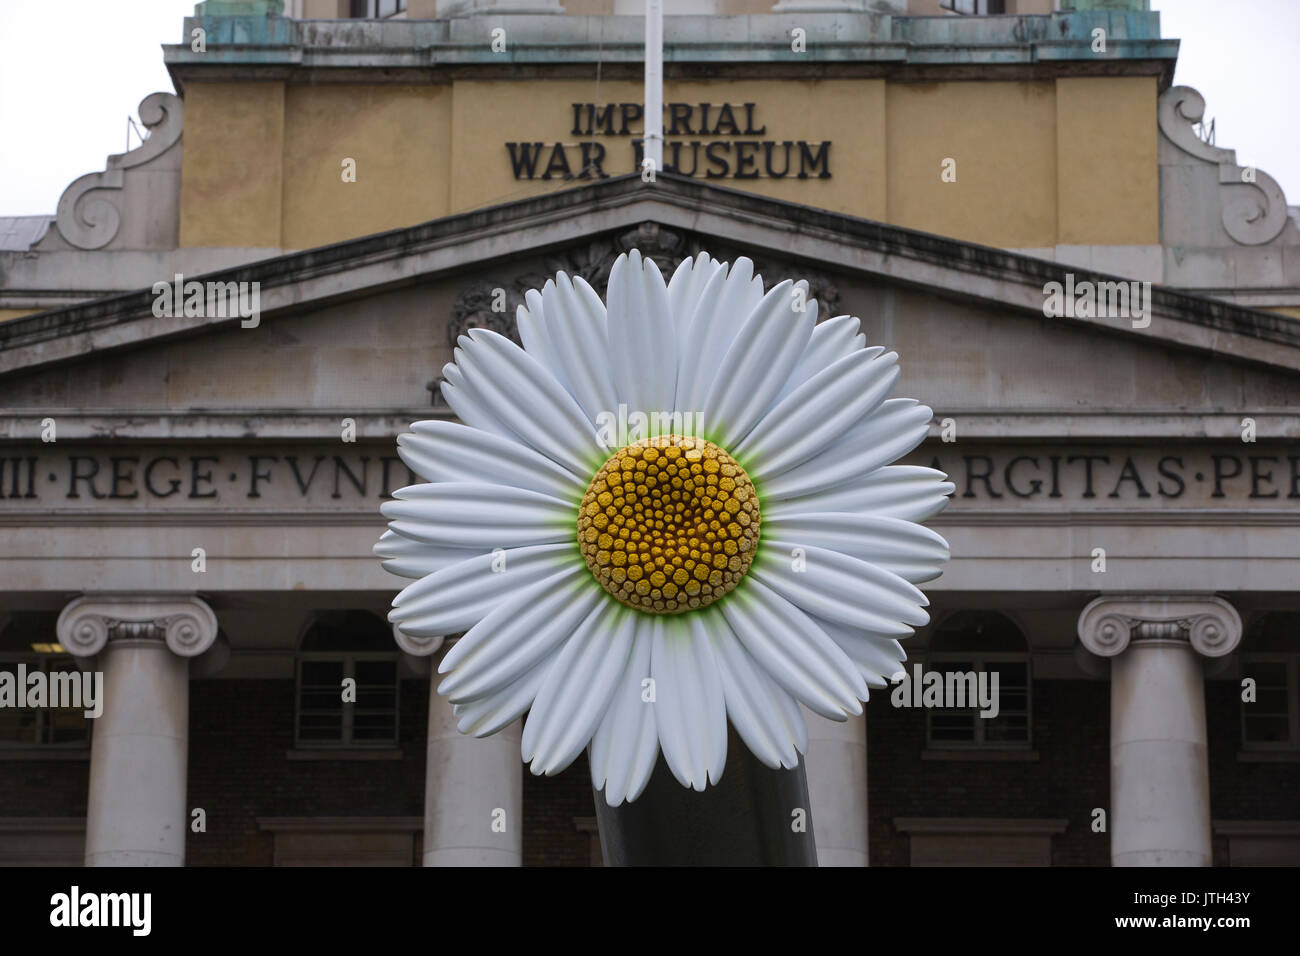 London, UK. 08th Aug, 2017. People Power: Fighting for Peace exhibition. Imperial War Museum, London, UK 8th August 2017 Two large-scale flowers will be will be temporarily placed on the 15-inch naval guns positioned in front of IWM London. Flowers were chosen as they have been a significant part of the peace movement, from the white poppy worn as a symbol of peace to the iconic image of a protester placing flowers in the barrels of rifles held by US military police at a demonstration against the Vietnam War in 1967. Credit: Jeff Gilbert/Alamy Live News Stock Photo